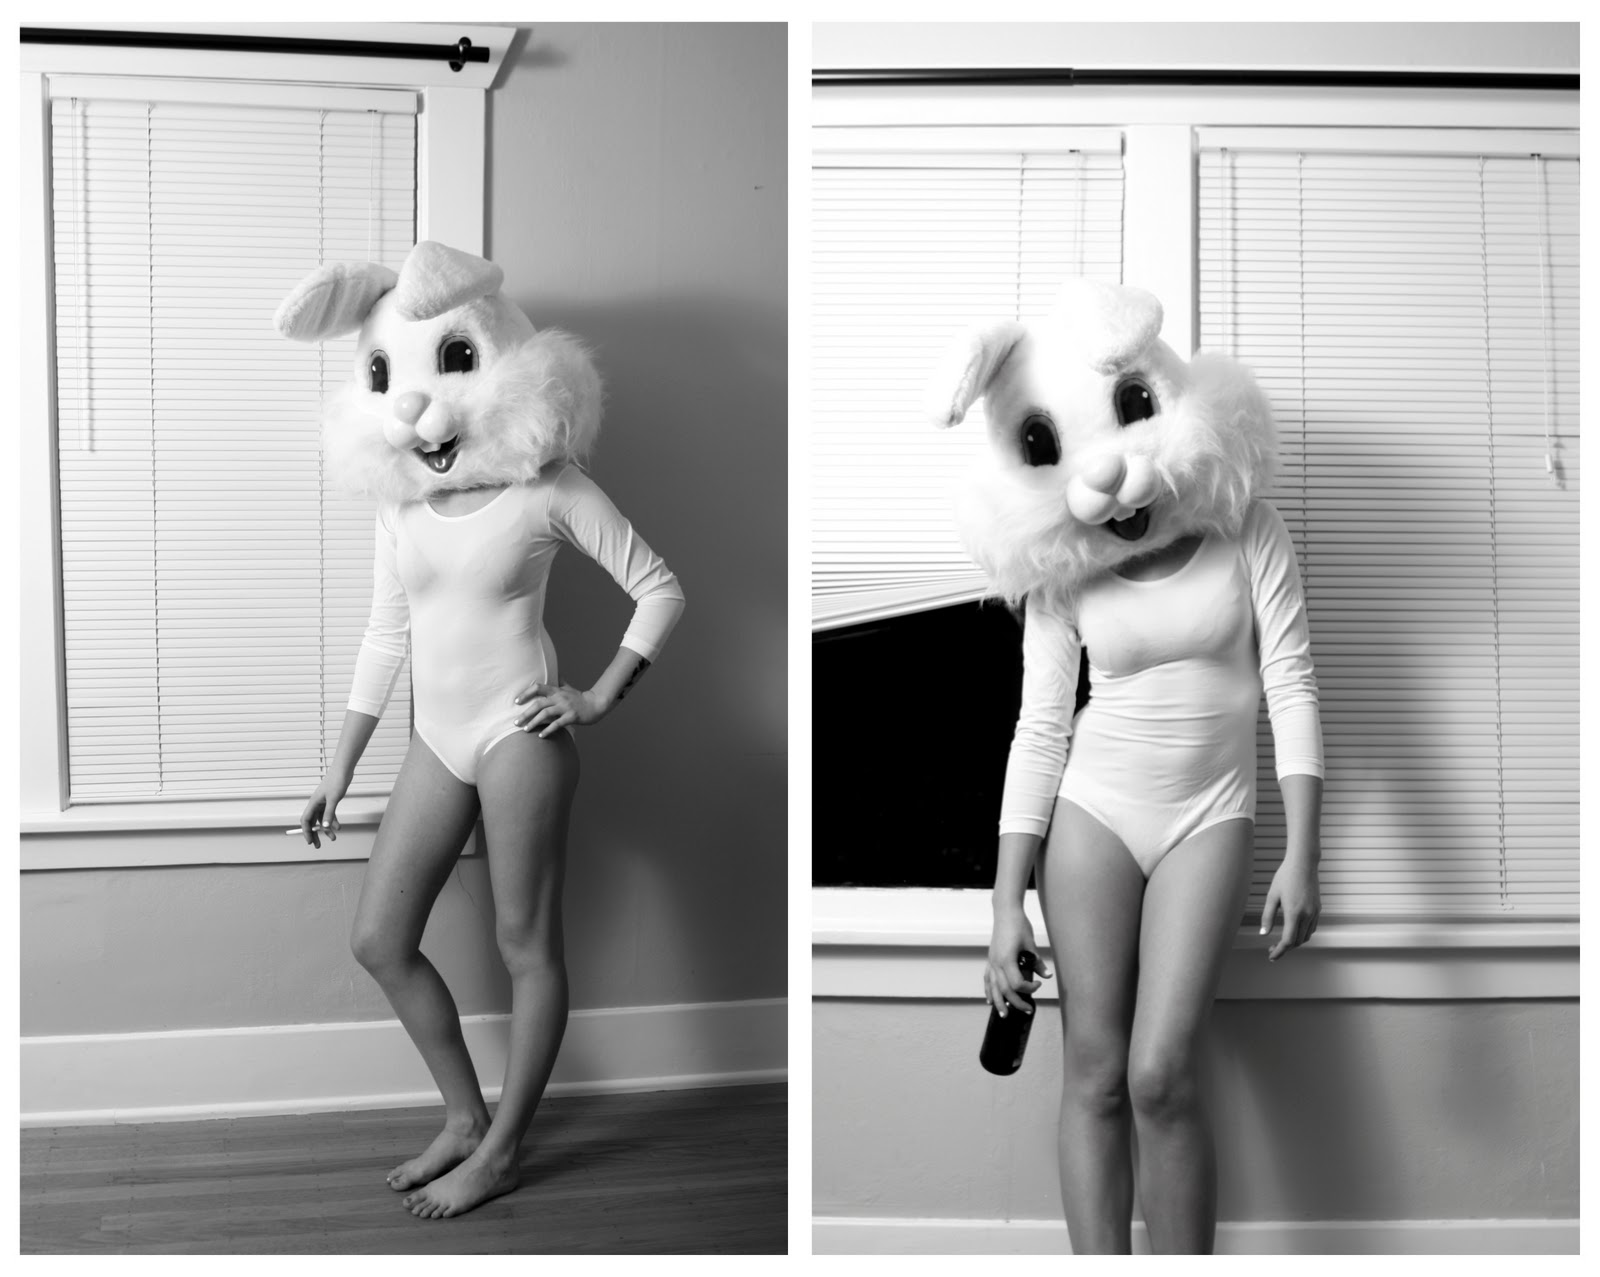 cfisherphotography: Lesbian Bunnies: the photo documentary of a ...